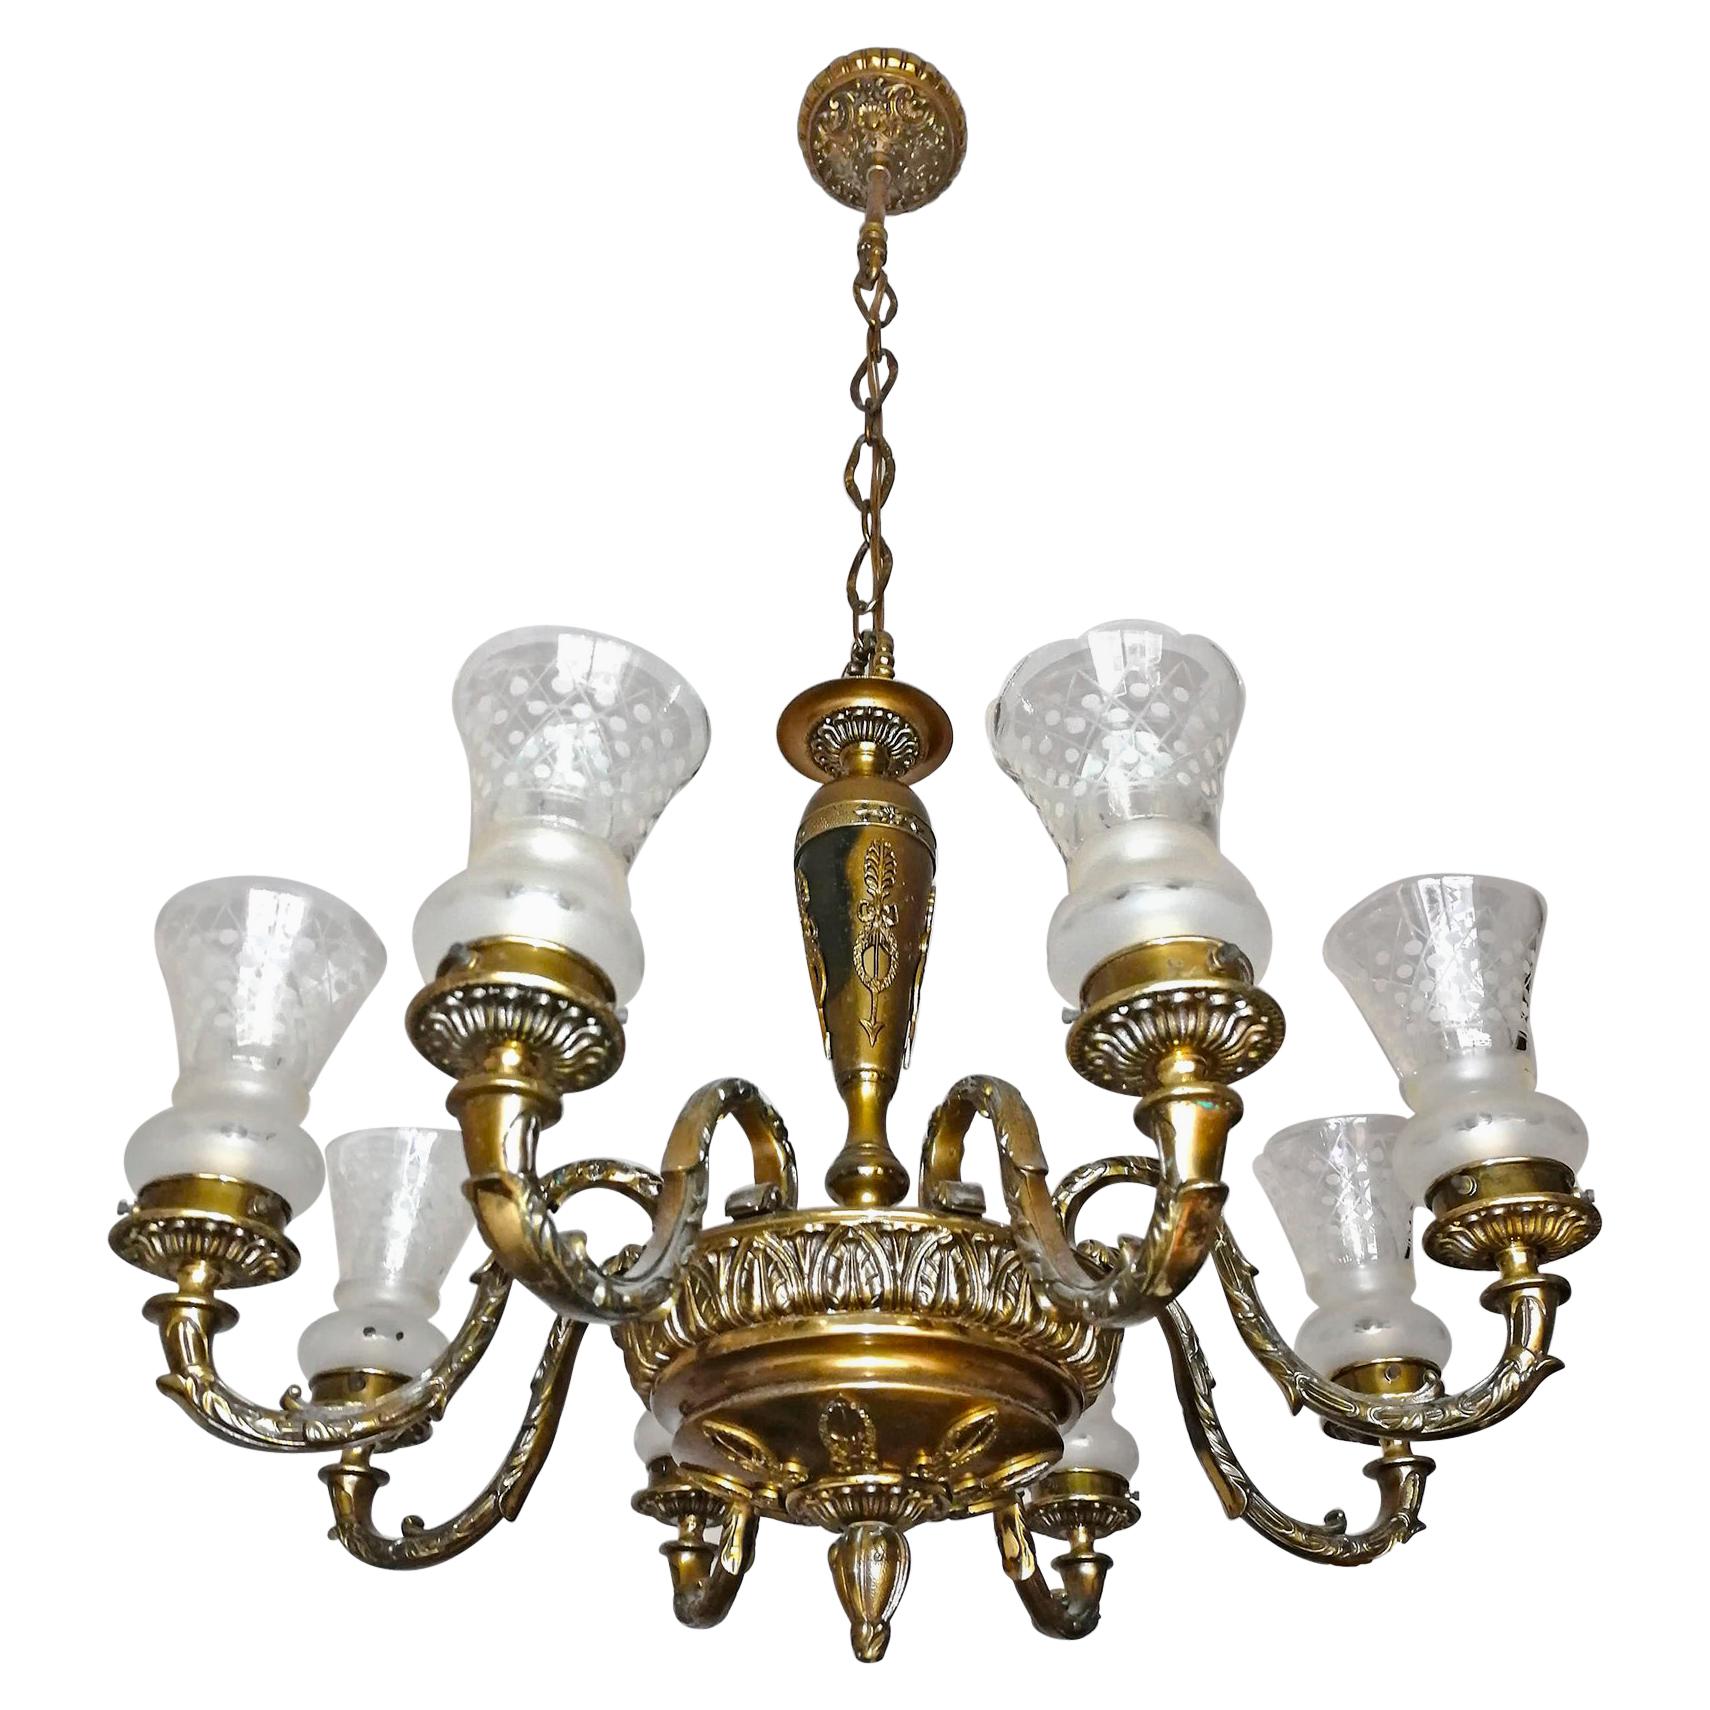 Antique French Empire Neoclassical Gilt Bronze Chandelier, Early 20th Century